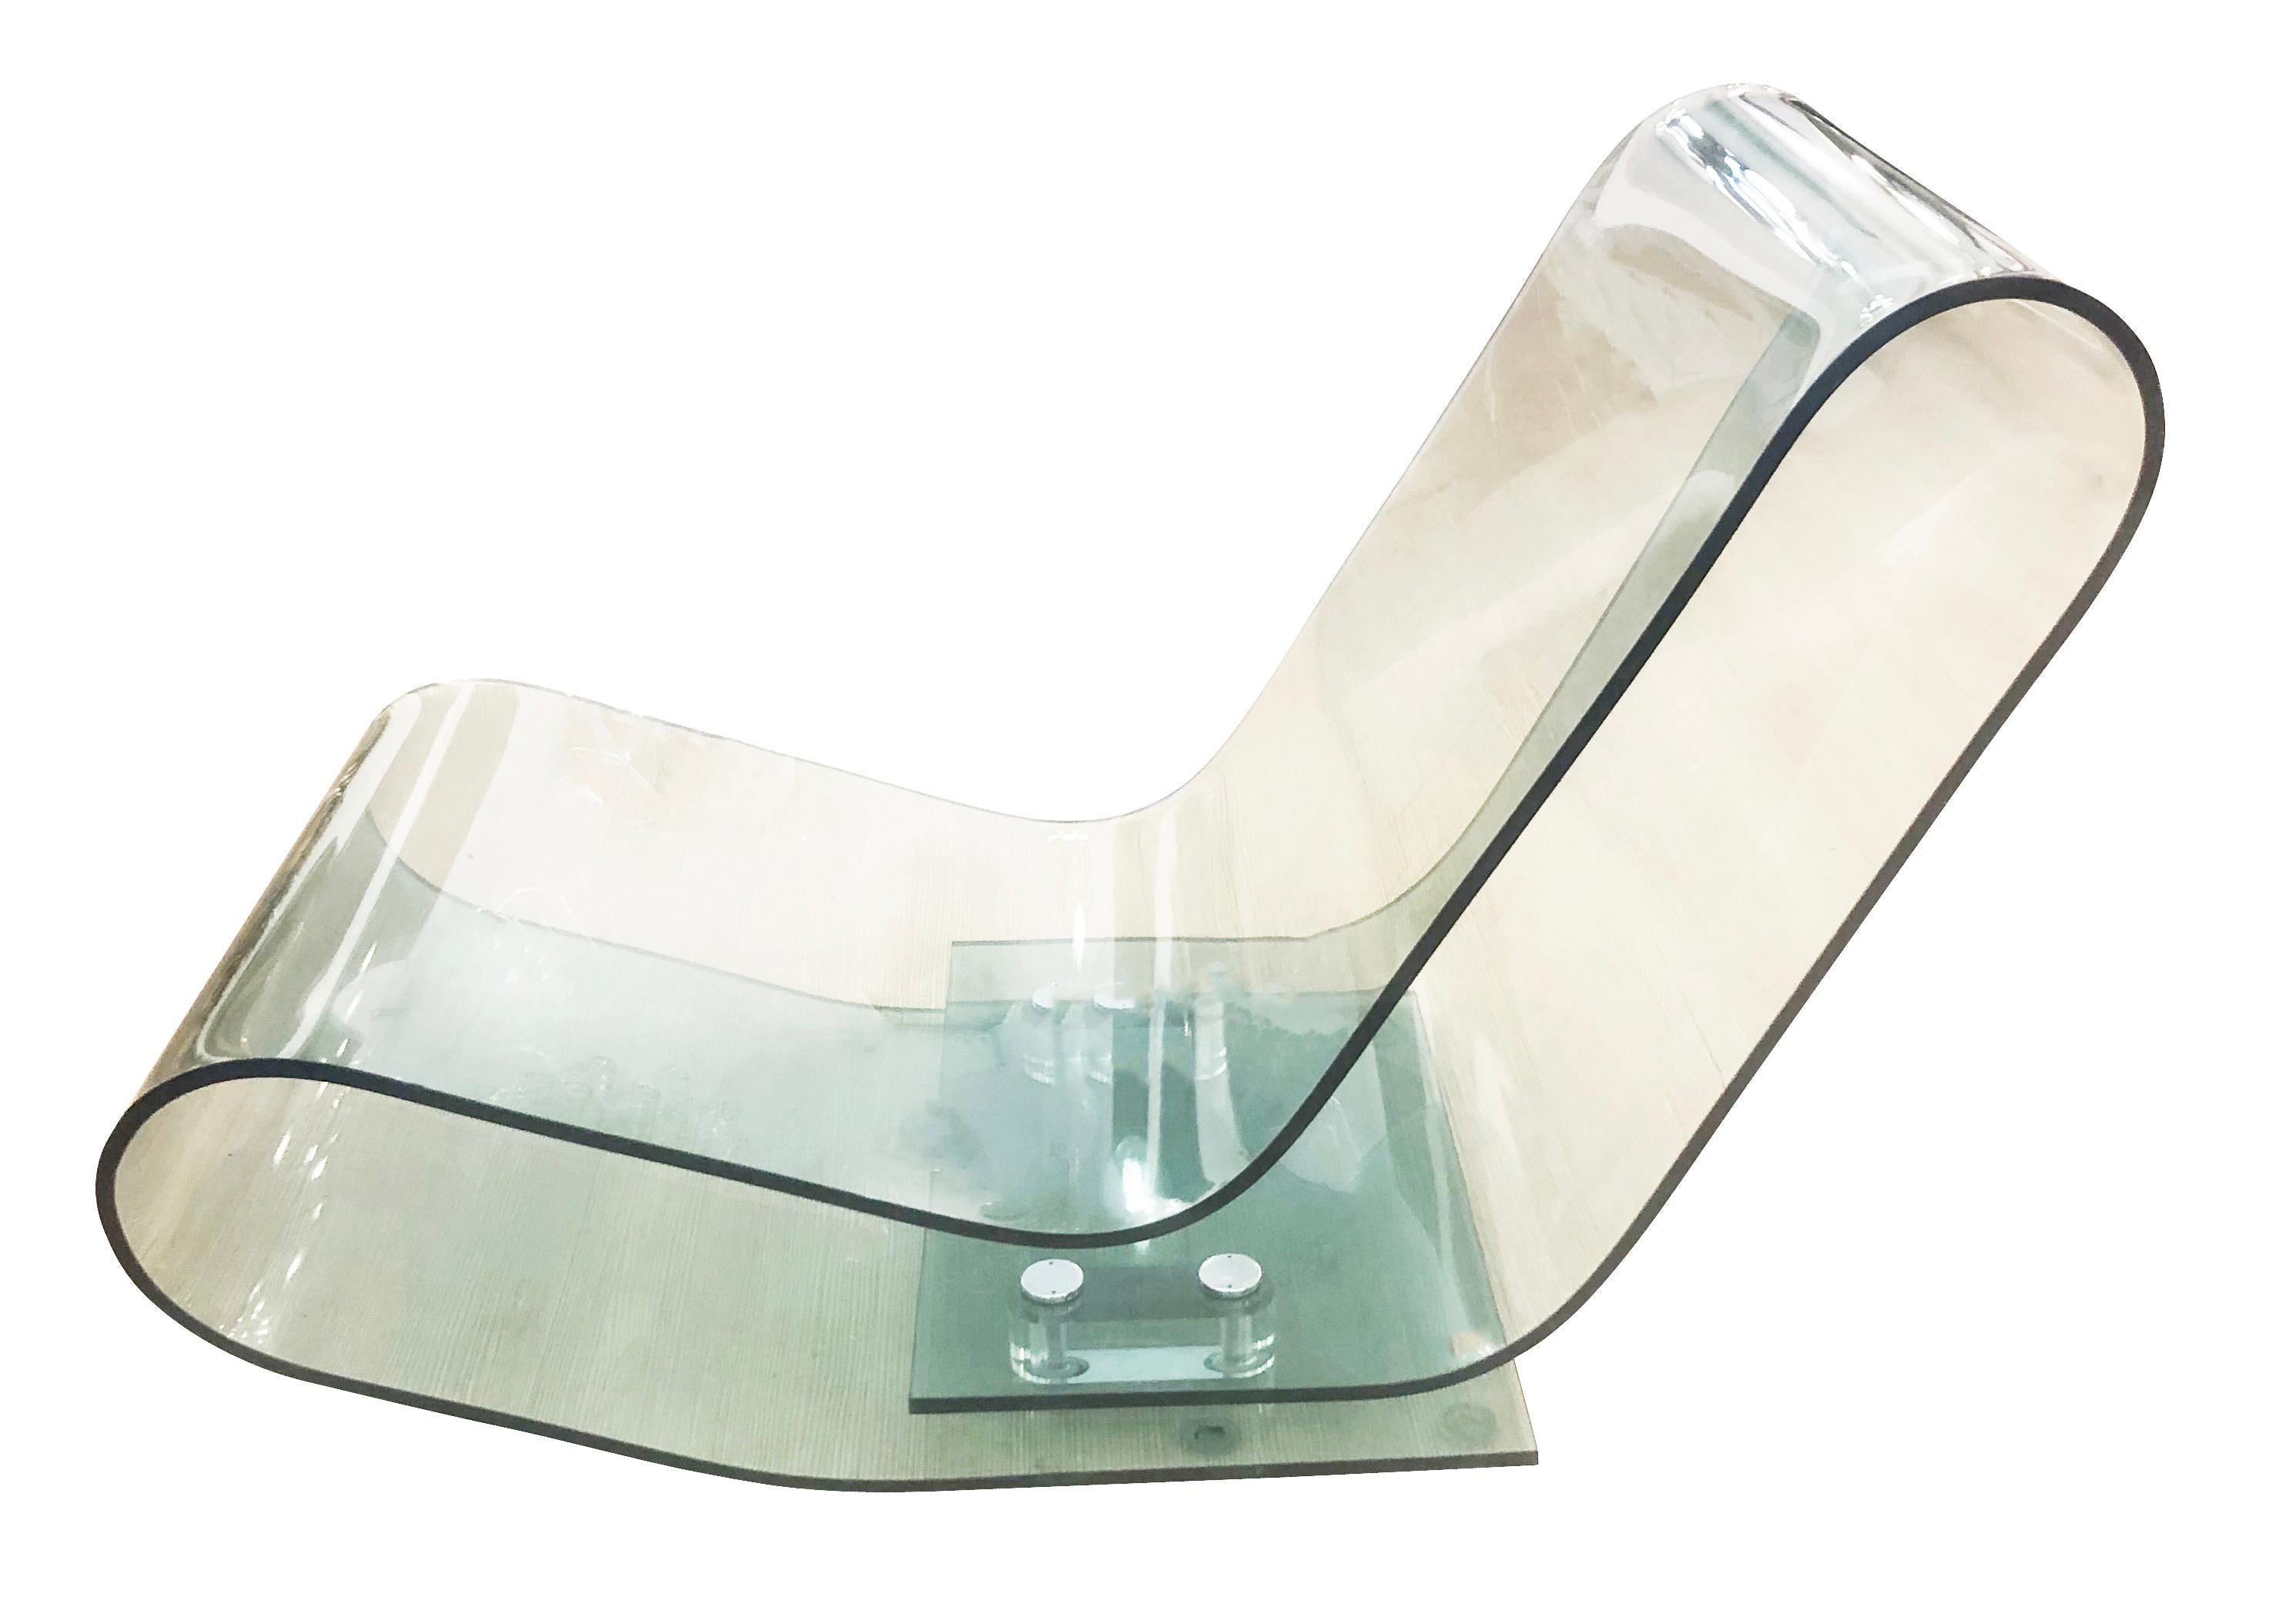 Lounge chair designed by Maarten Van Severen for Kartell in the 1990s. Made with a specialty plexiglass which allows for its unique design while maintaining support and comfort.

Condition: Excellent vintage condition, minor wear consistent with